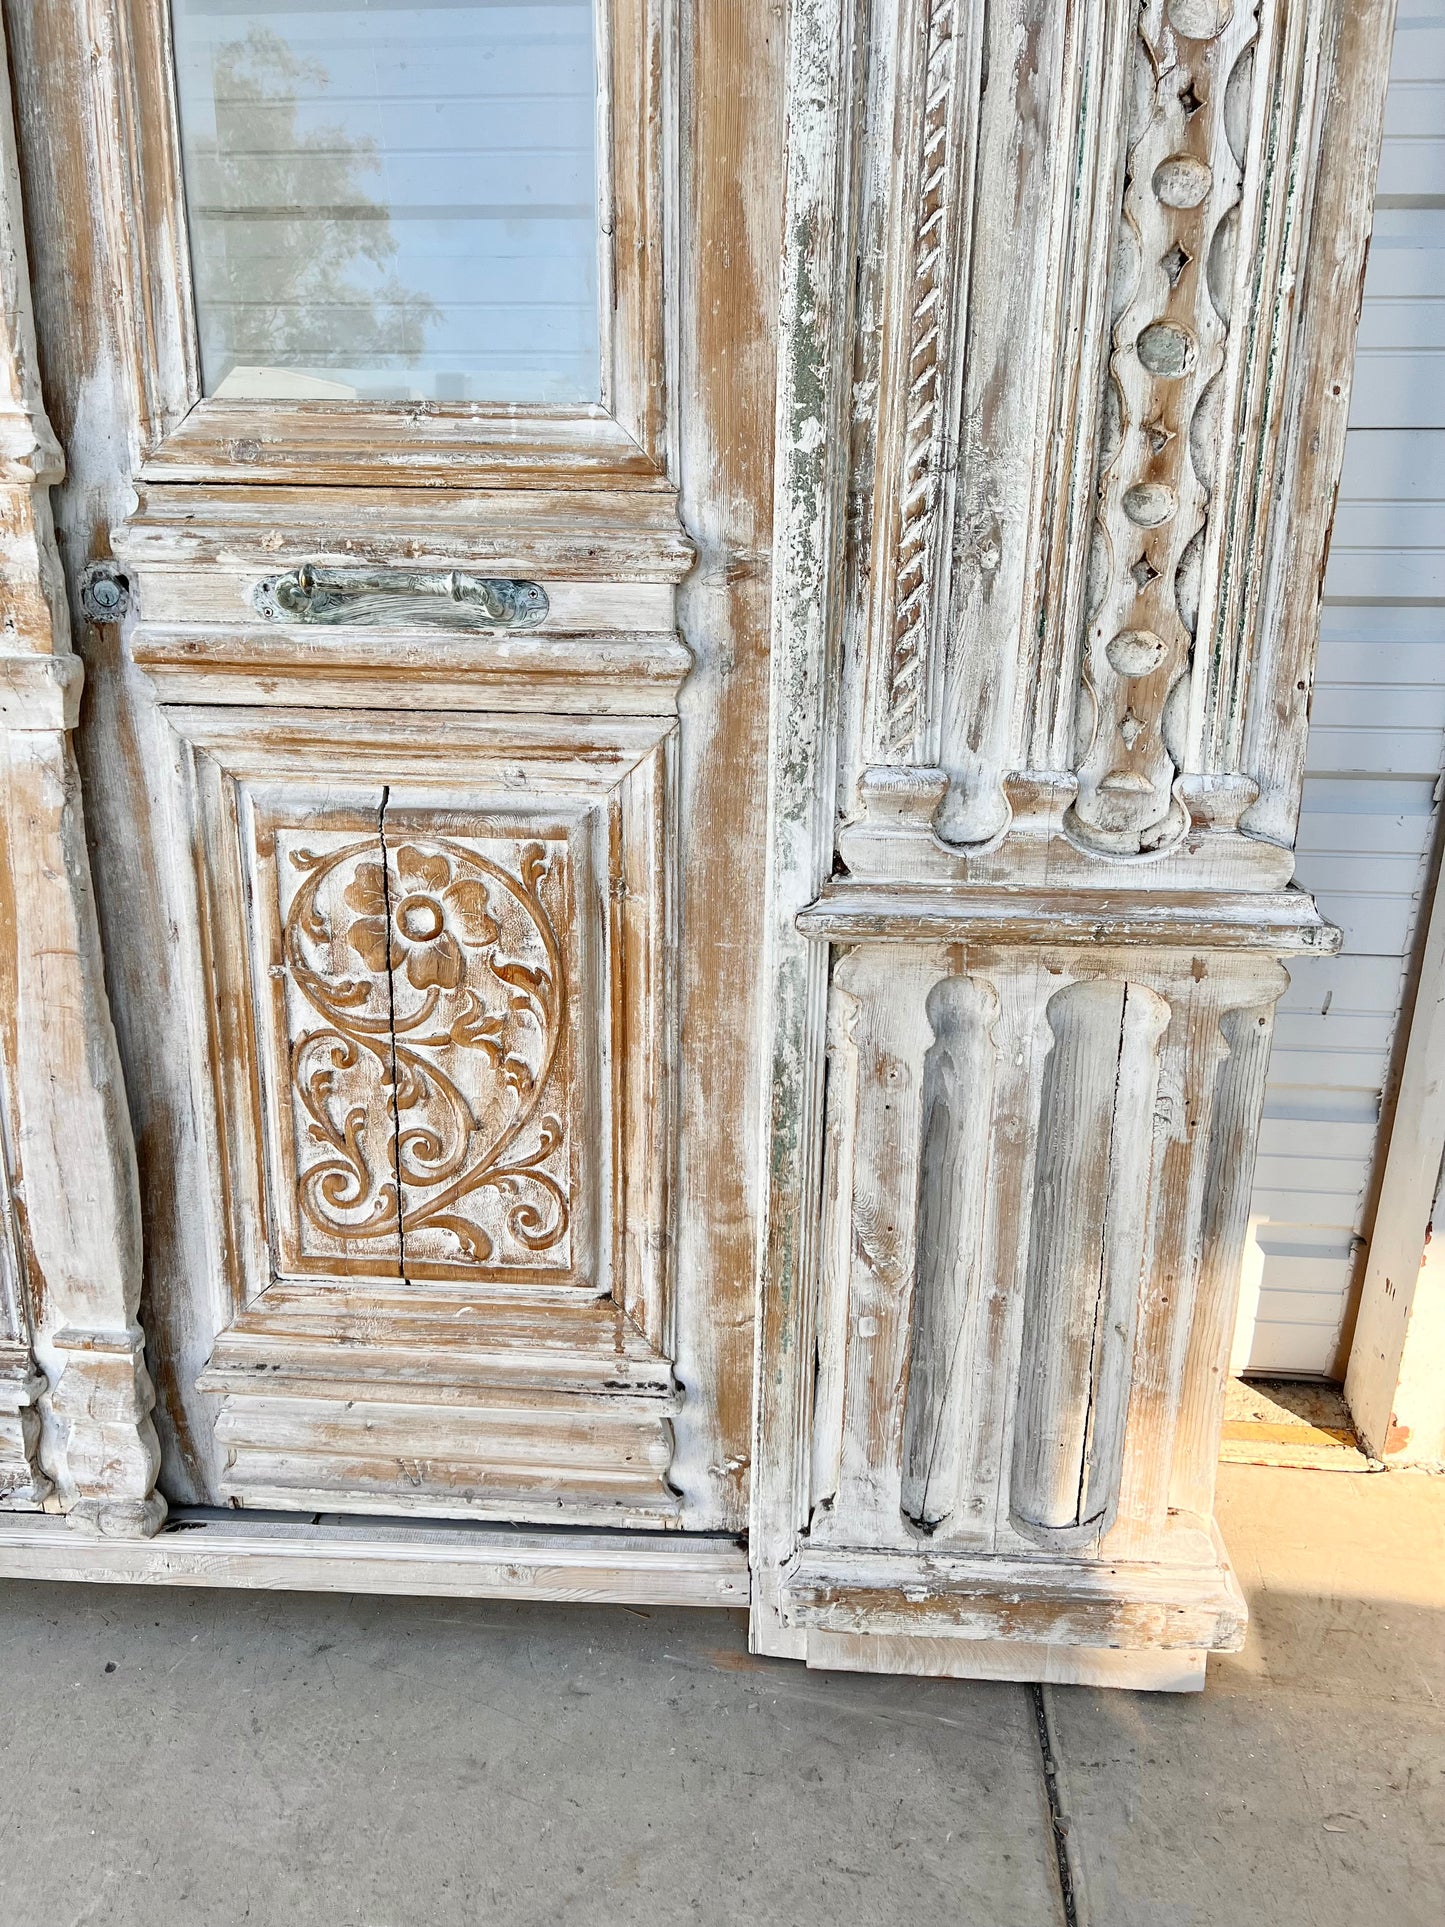 Pair of Ornately Carved Antique Doors in Large Frame with Transom